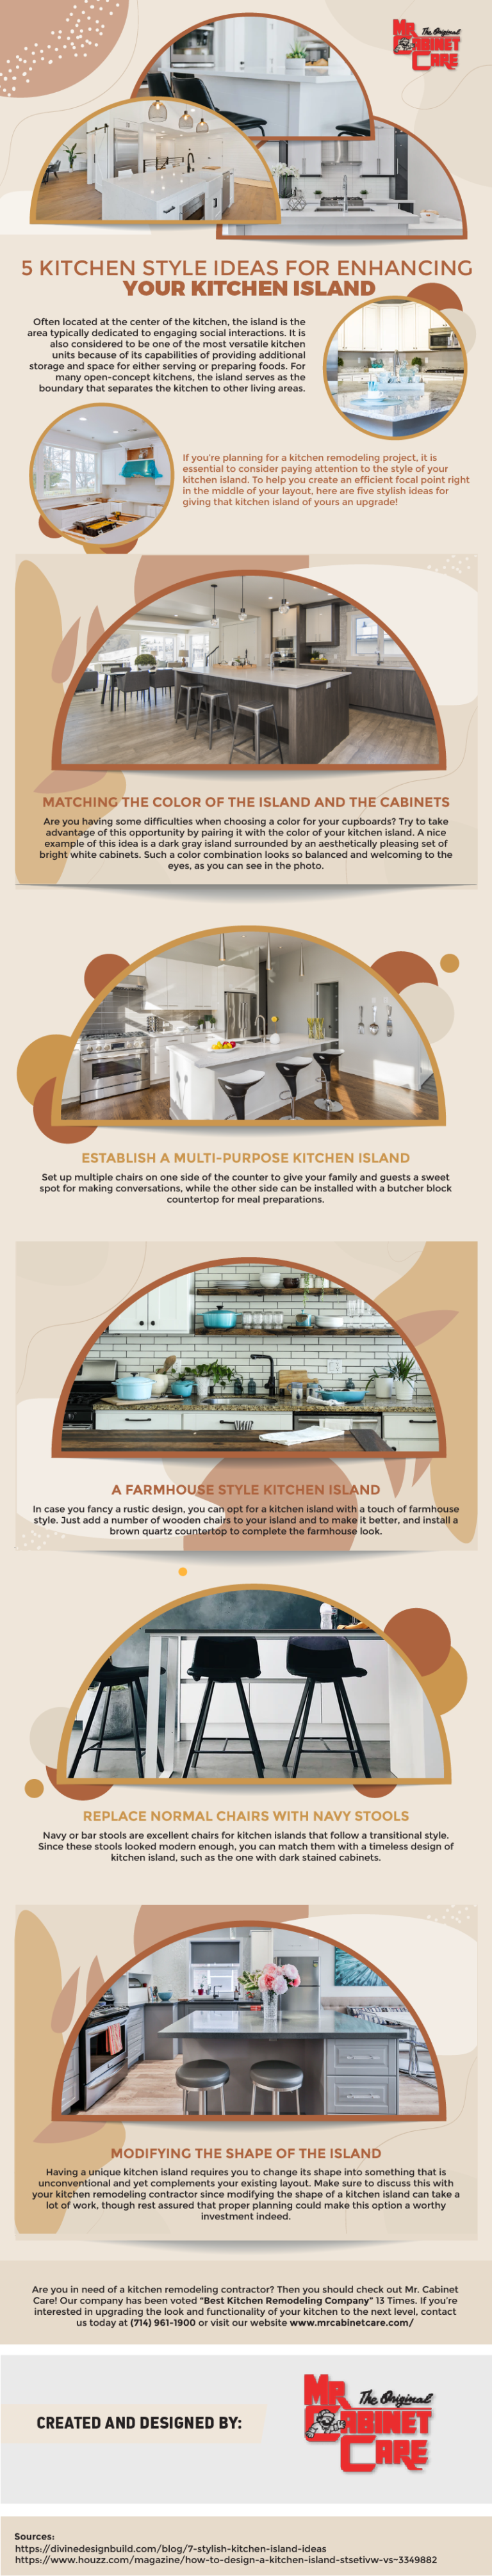 5 Kitchen Style Ideas for Enhancing your Kitchen Island